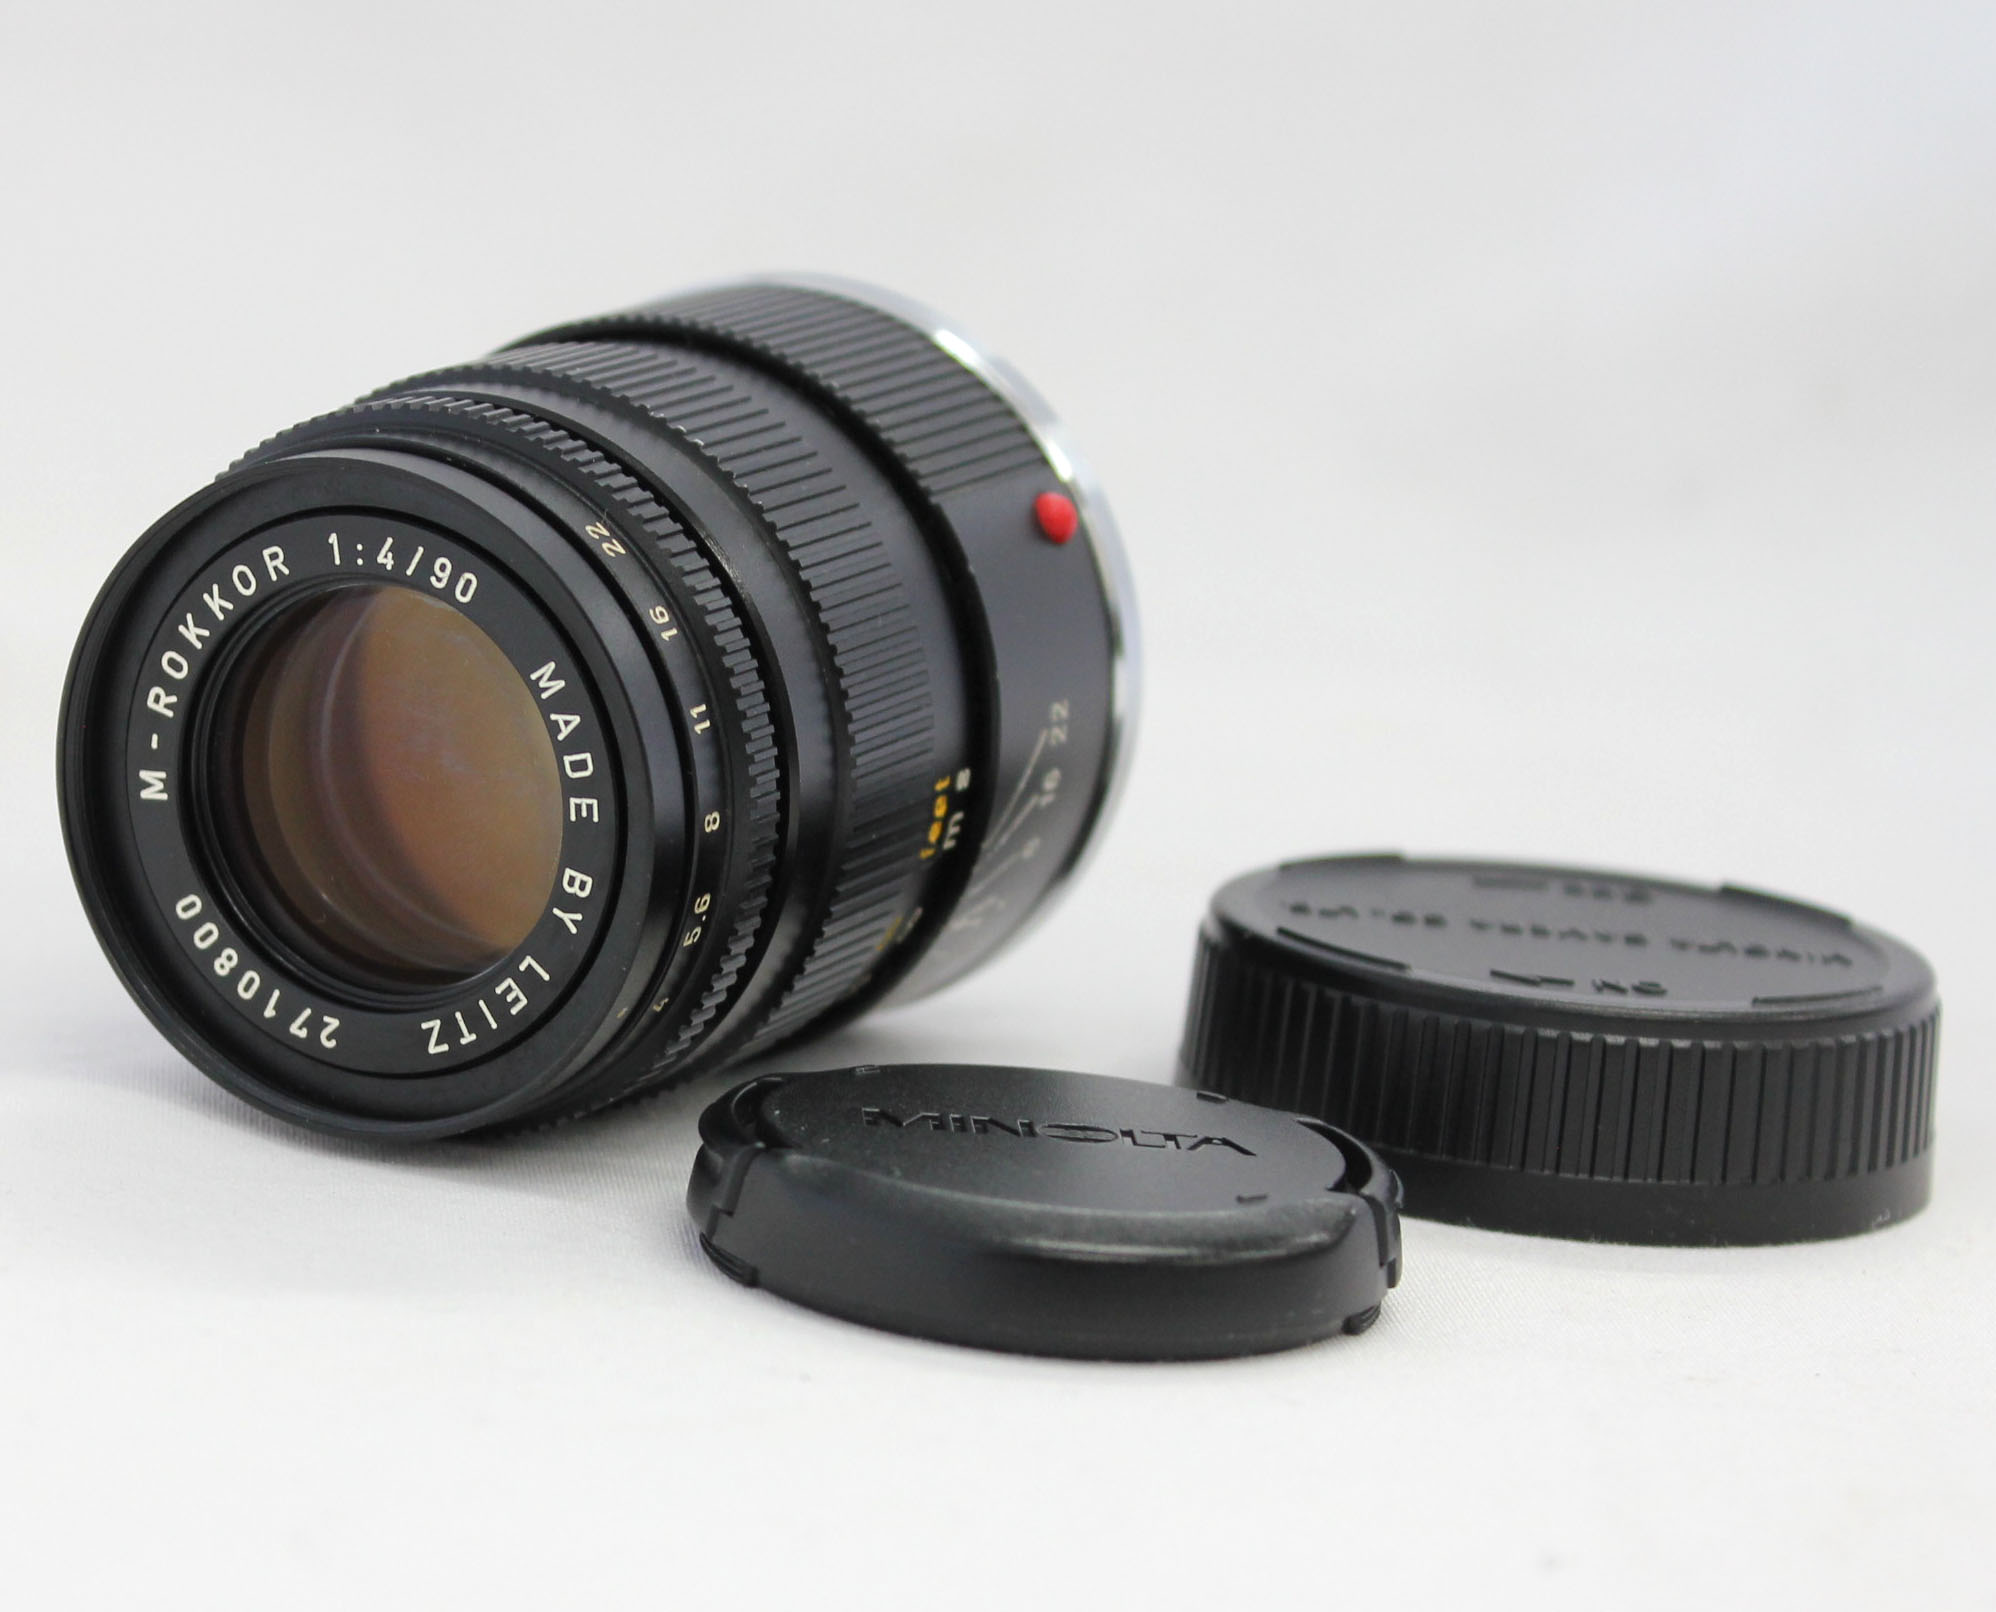 Japan Used Camera Shop | Minolta M-Rokkor 90mm F/4 Made by Leitz Made in Germany for Leica M mount from Japan